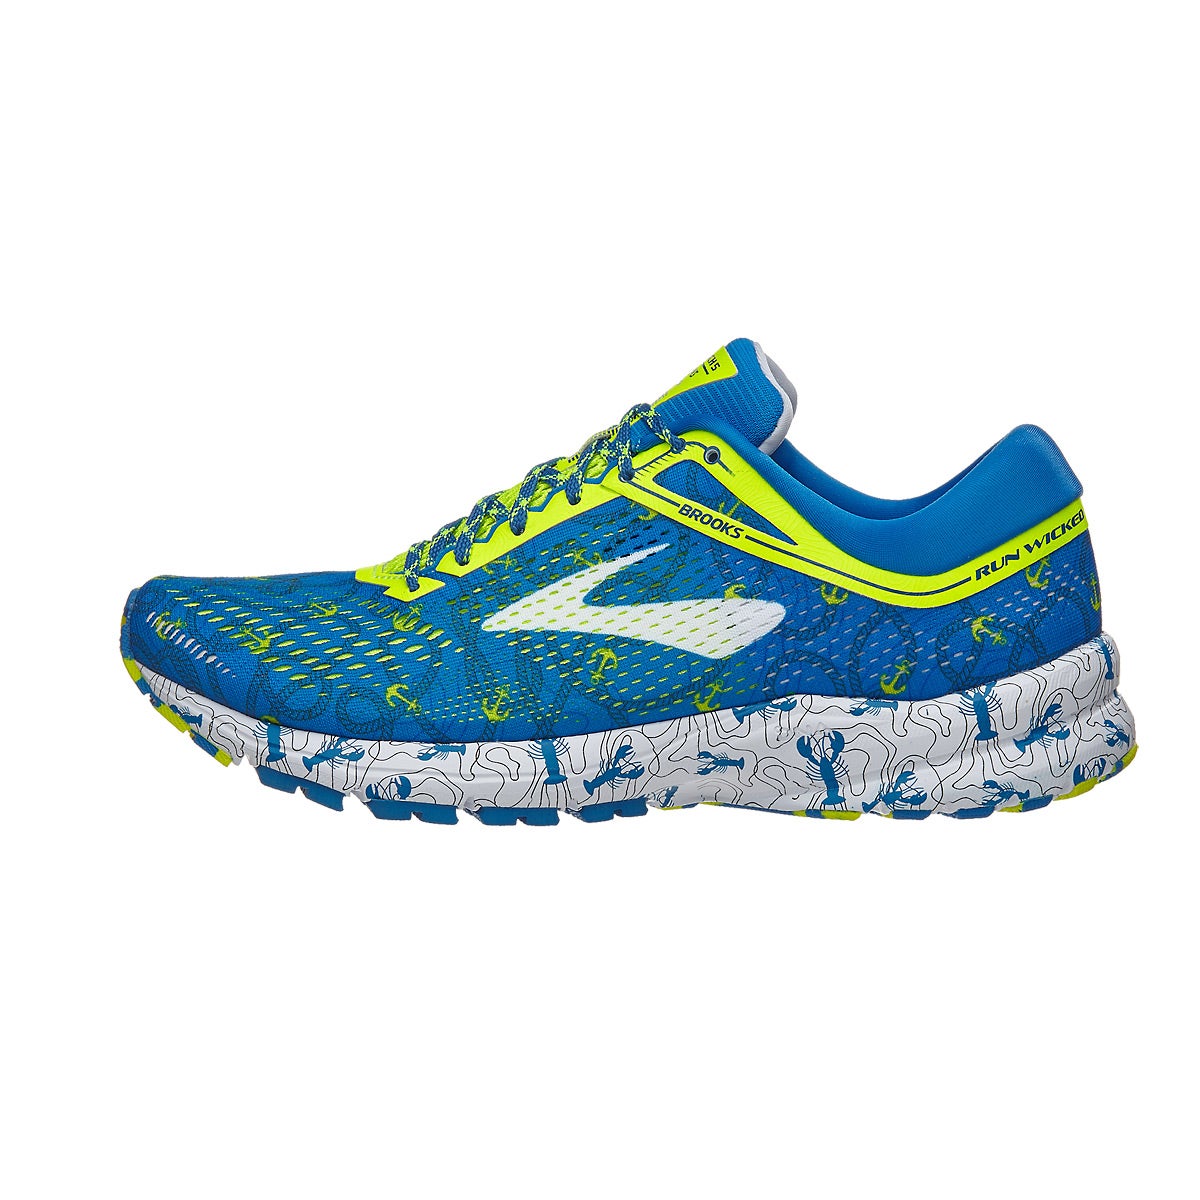 brooks launch lobster